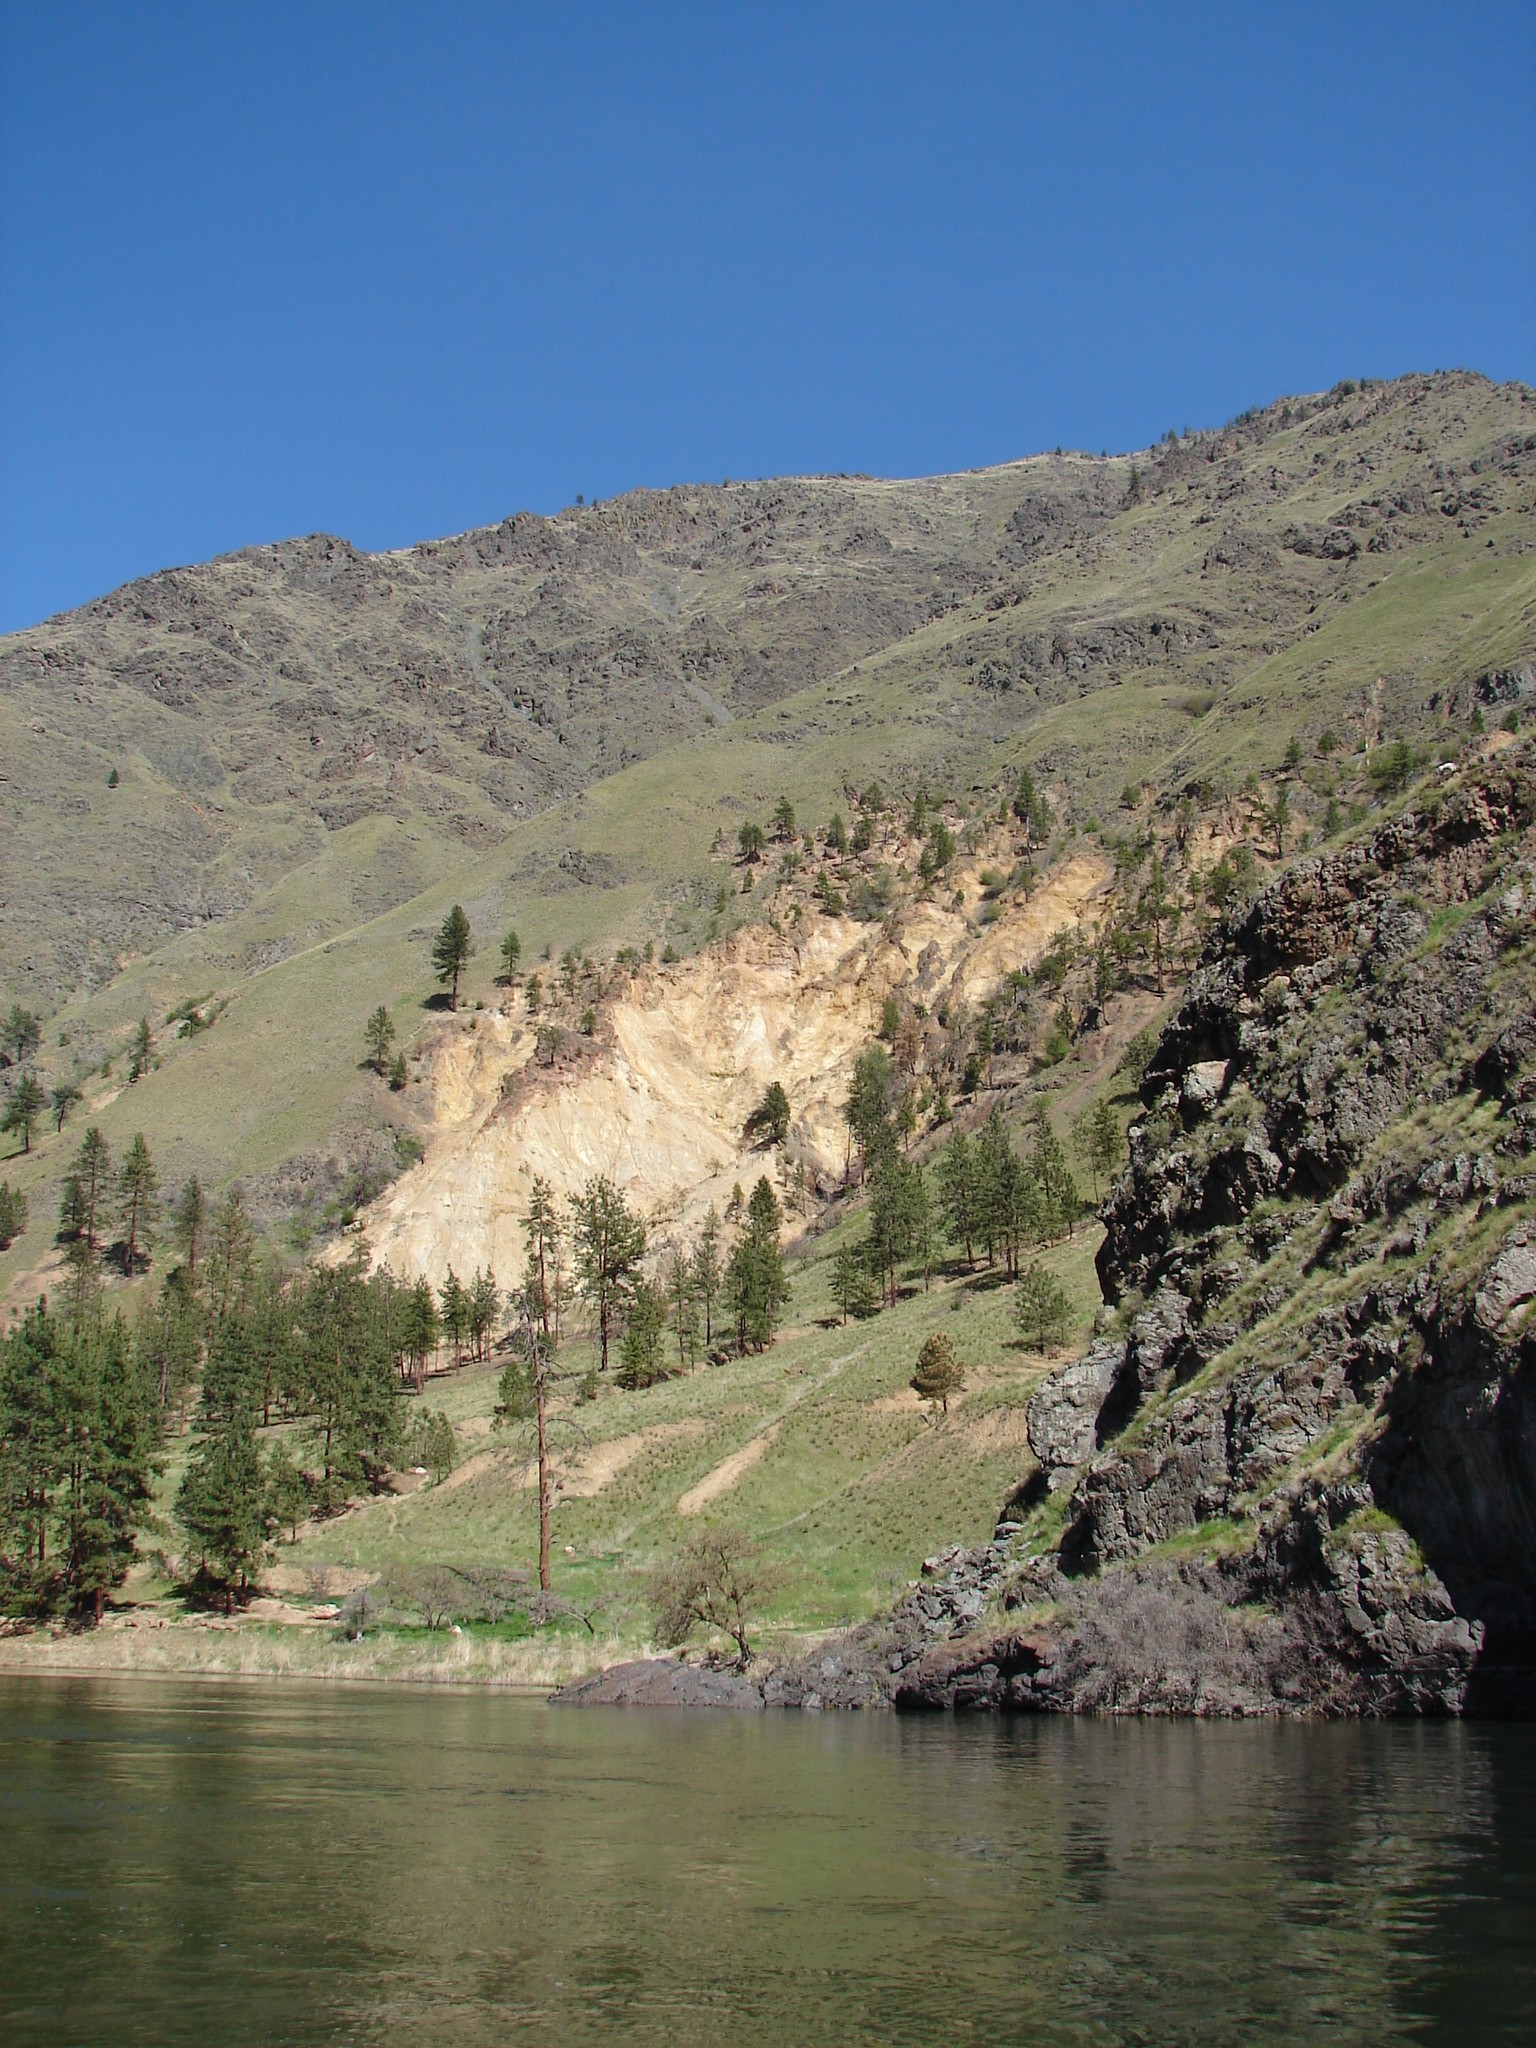 Grassy slope above Pine Bar on the Snake River in foreground